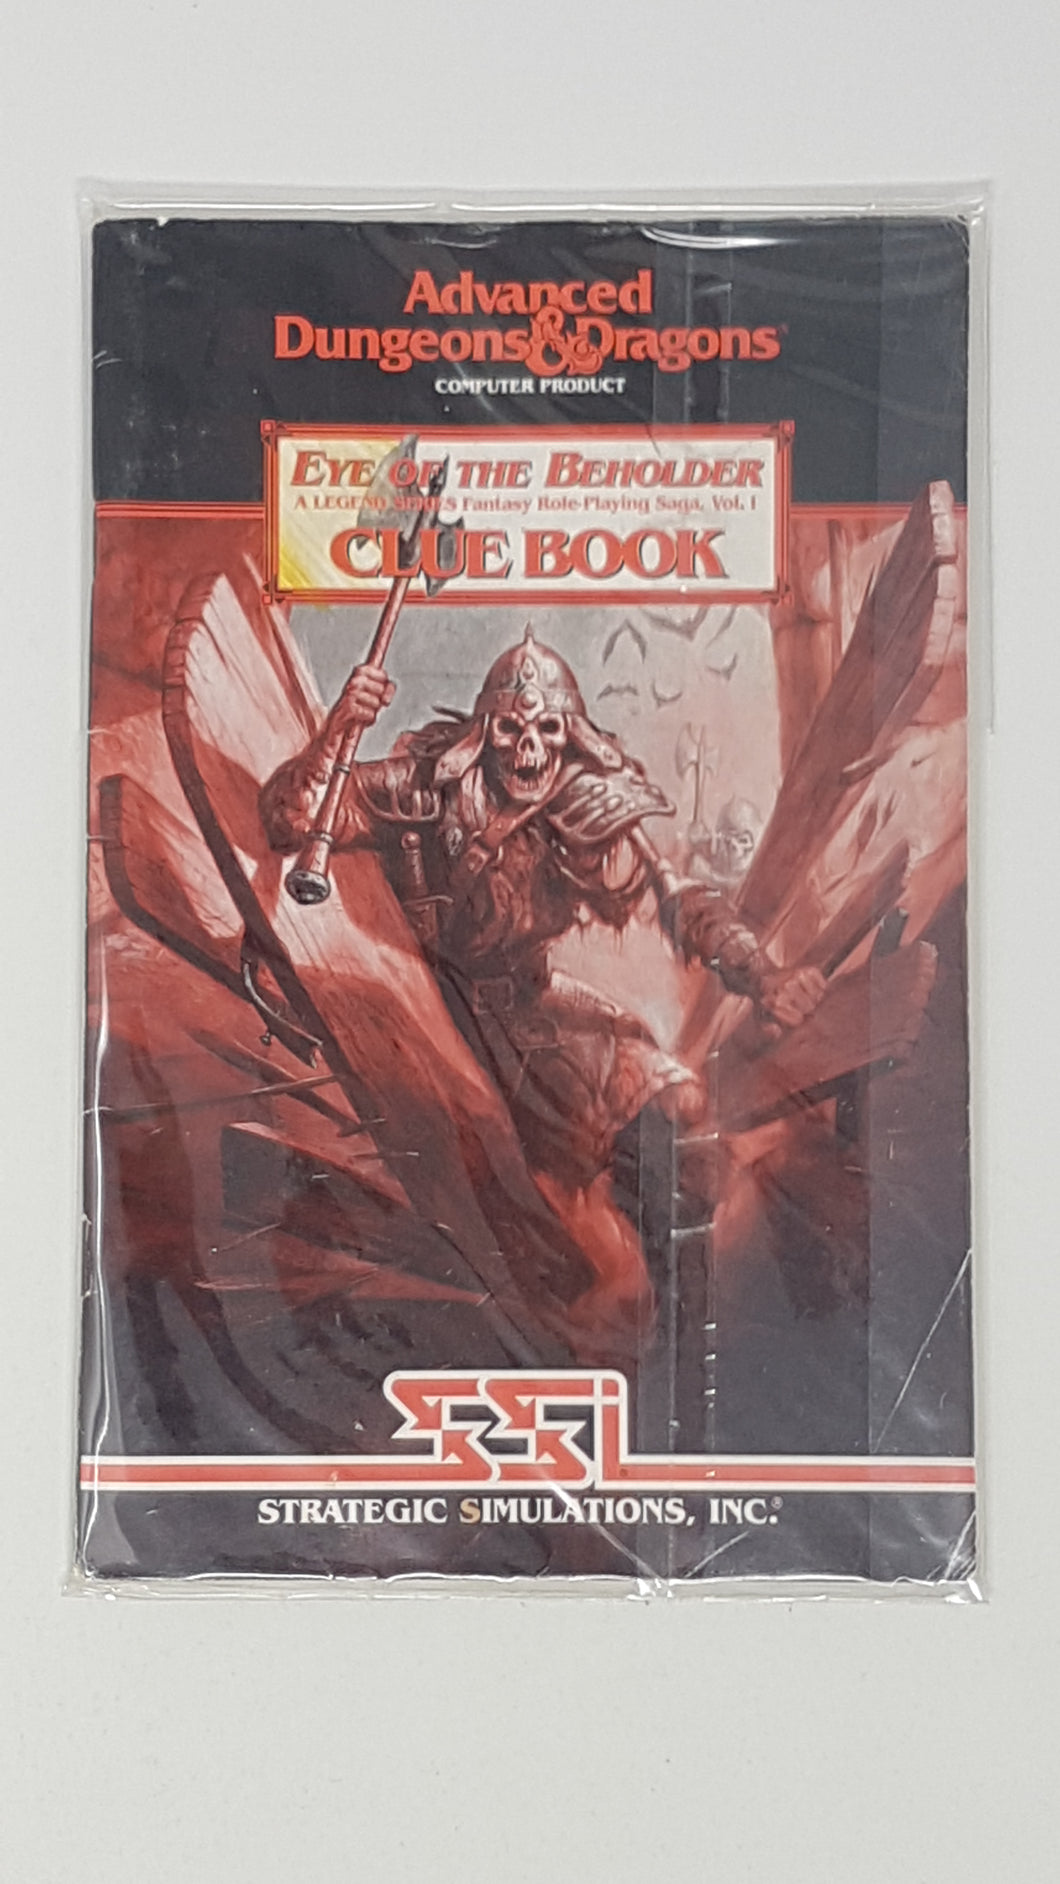 Eye of the Beholder Clue Book Advance Dungeons and Dragons [Strategic Simulations] - Strategy Guide